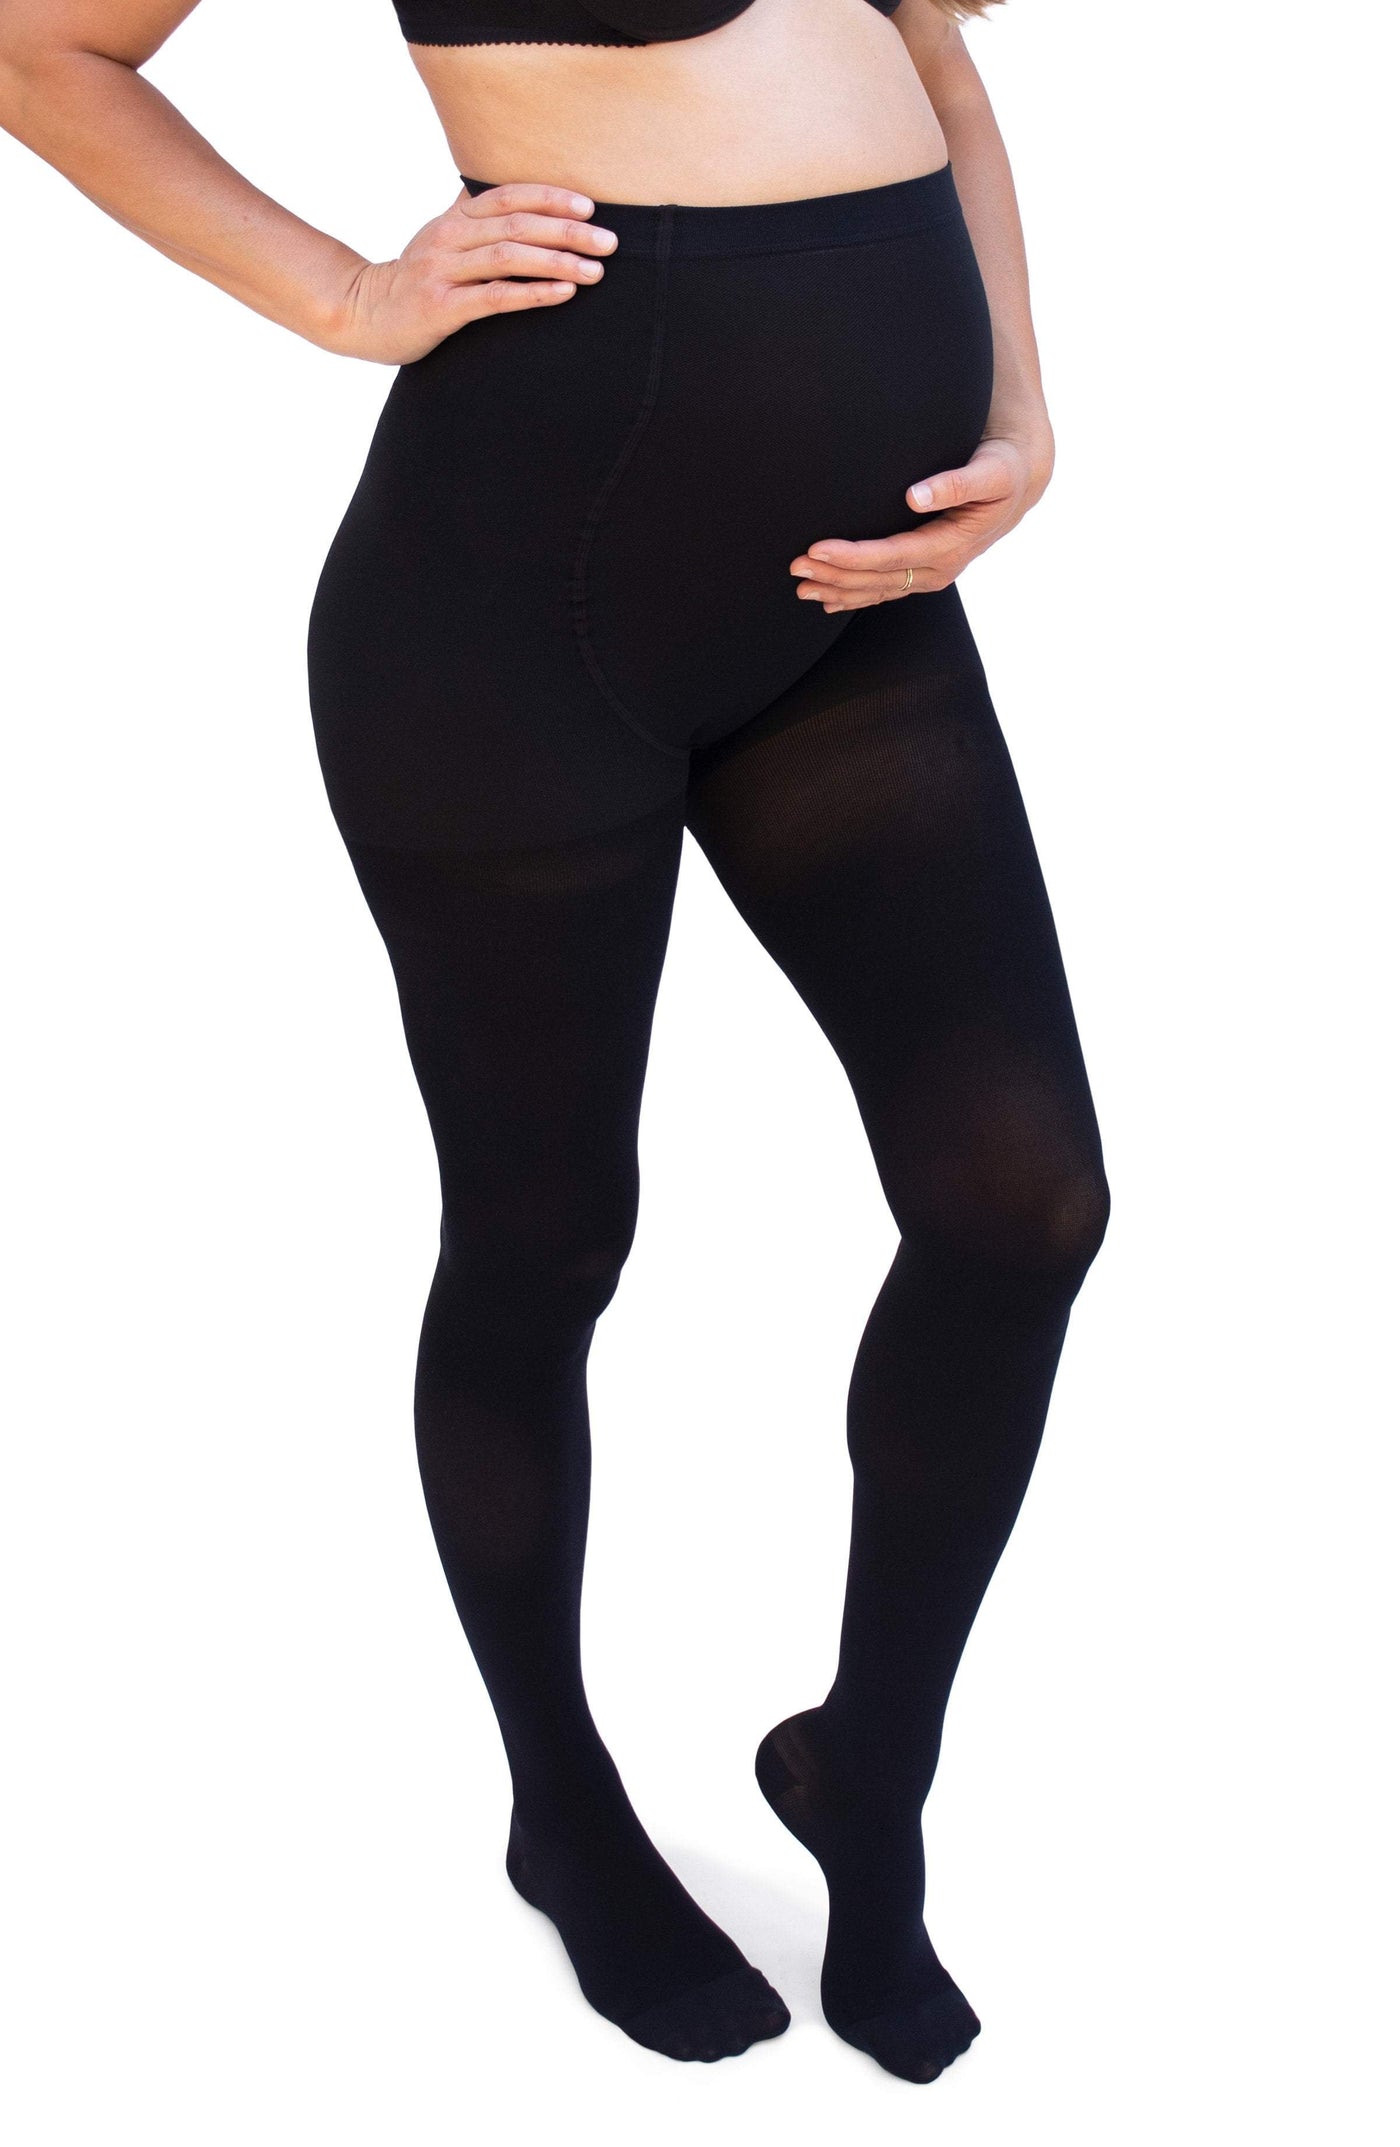 Belly Bandit Belly Bandit Maternity Compression Tights